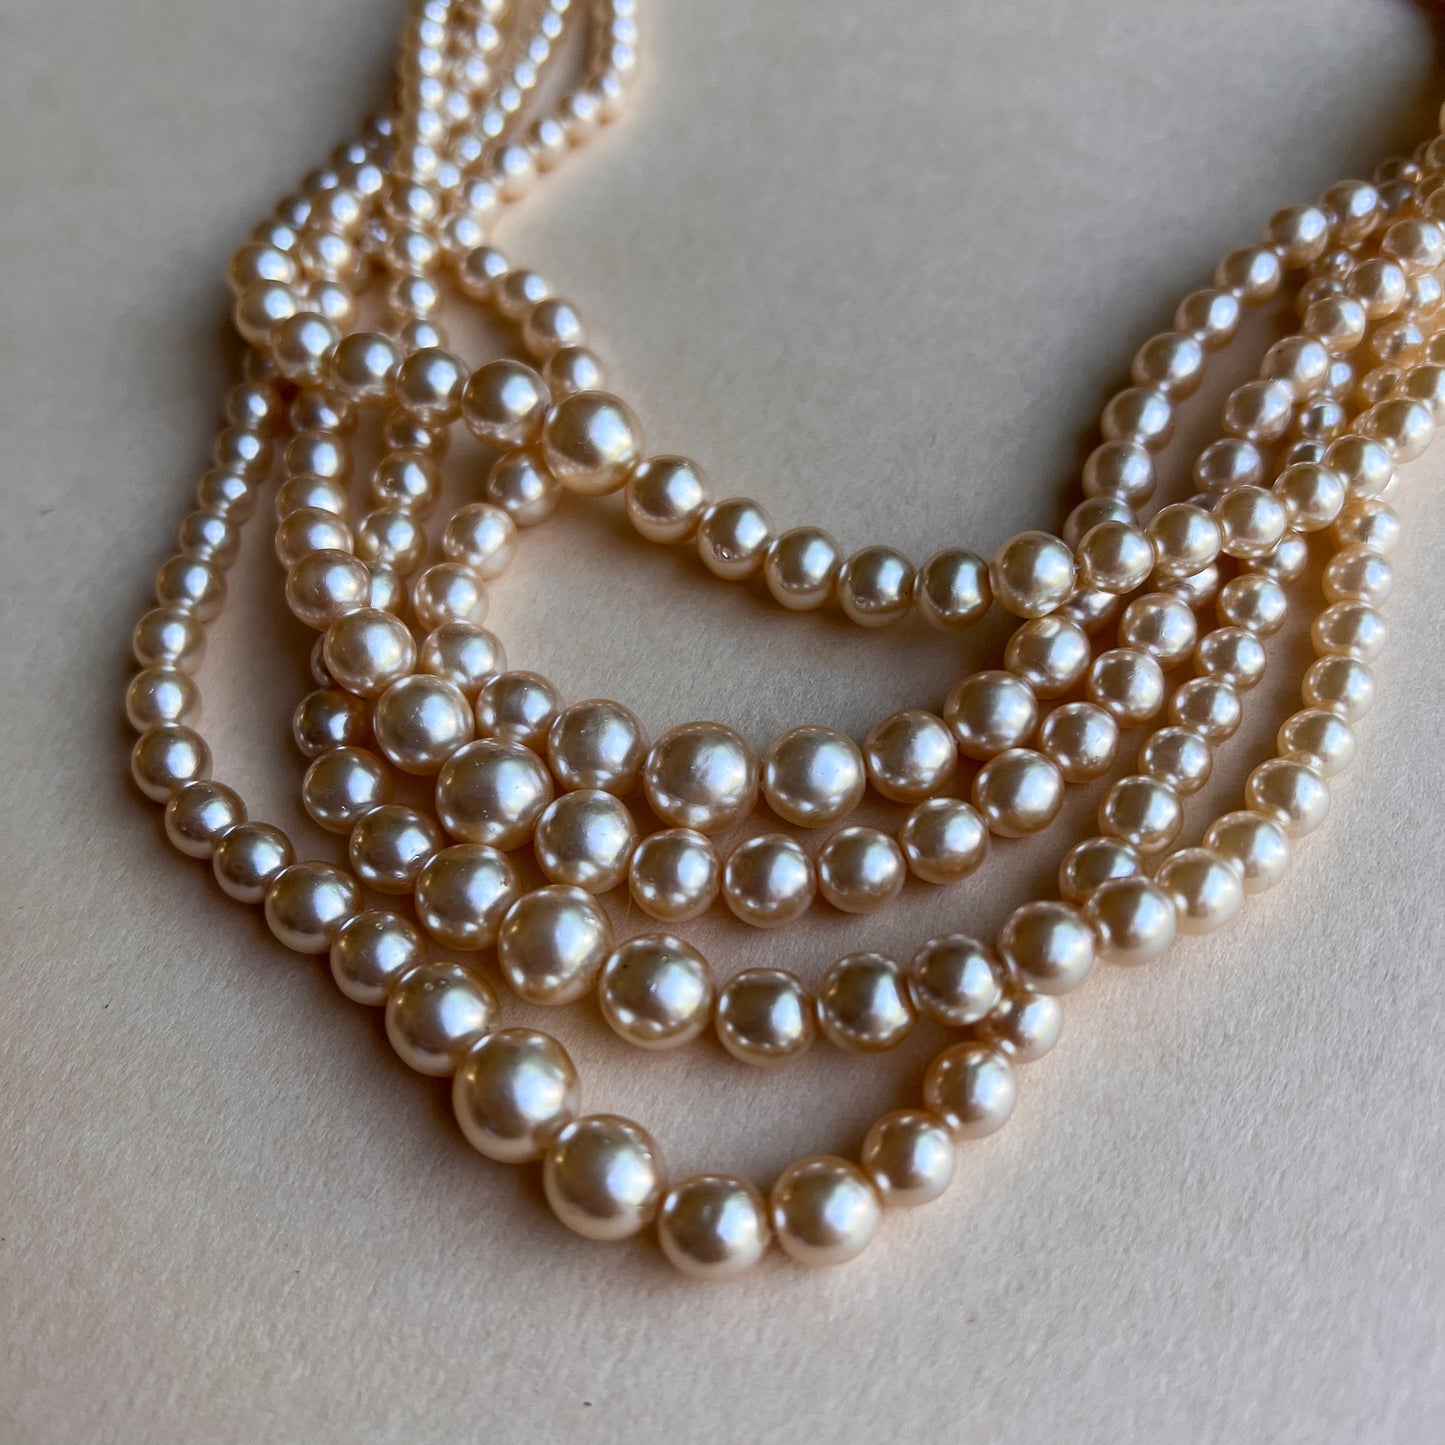 1950s Multi-Layered Luxurious Pearl Necklace With Rhinestones